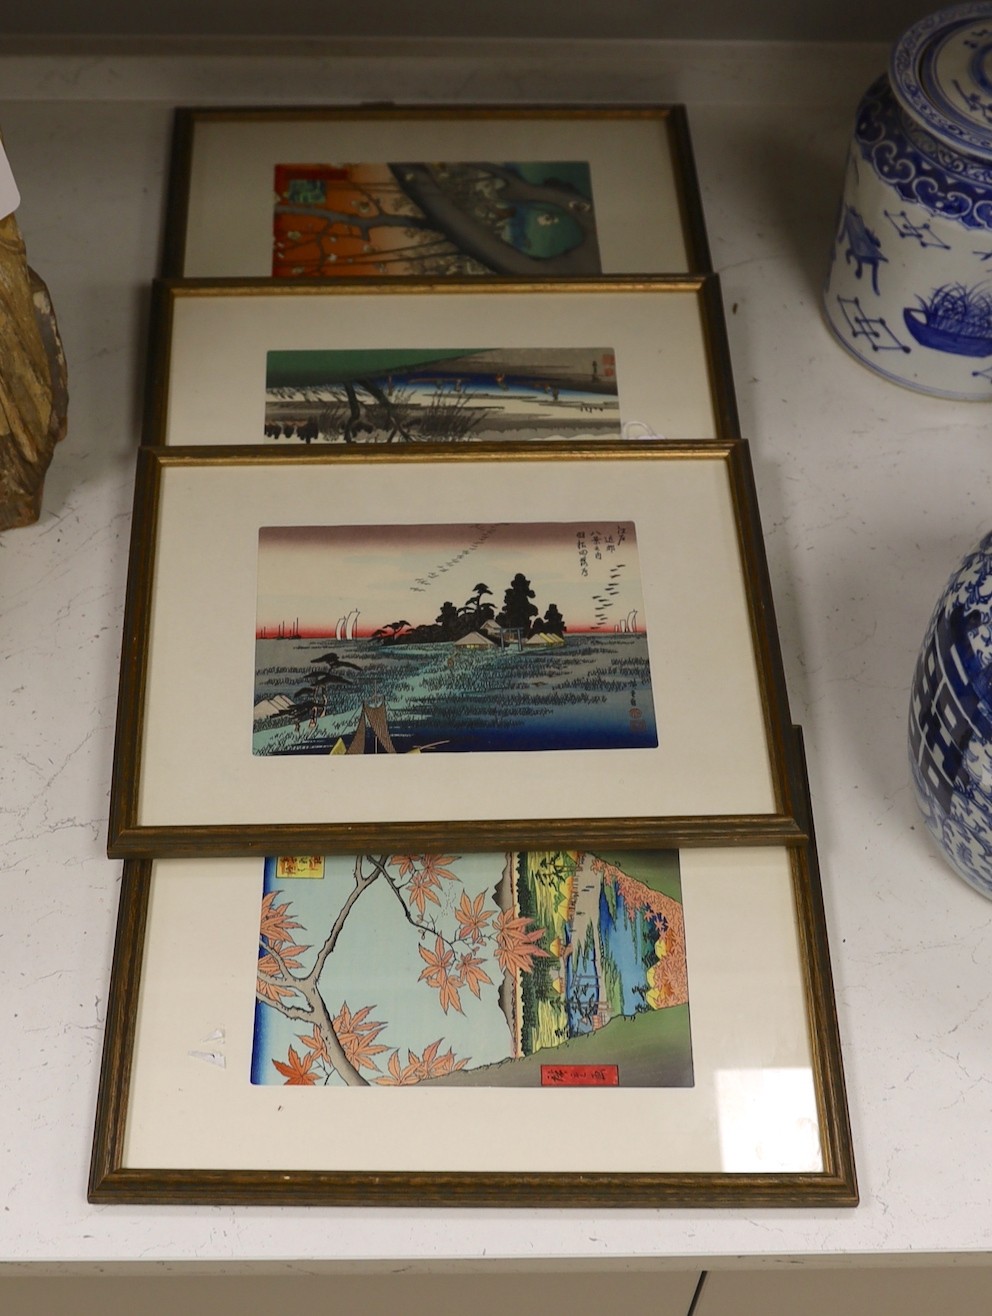 Hiroshige Ando (1797-1858), four woodblock prints from the Views of Edo, largest overall 26 x 35cm